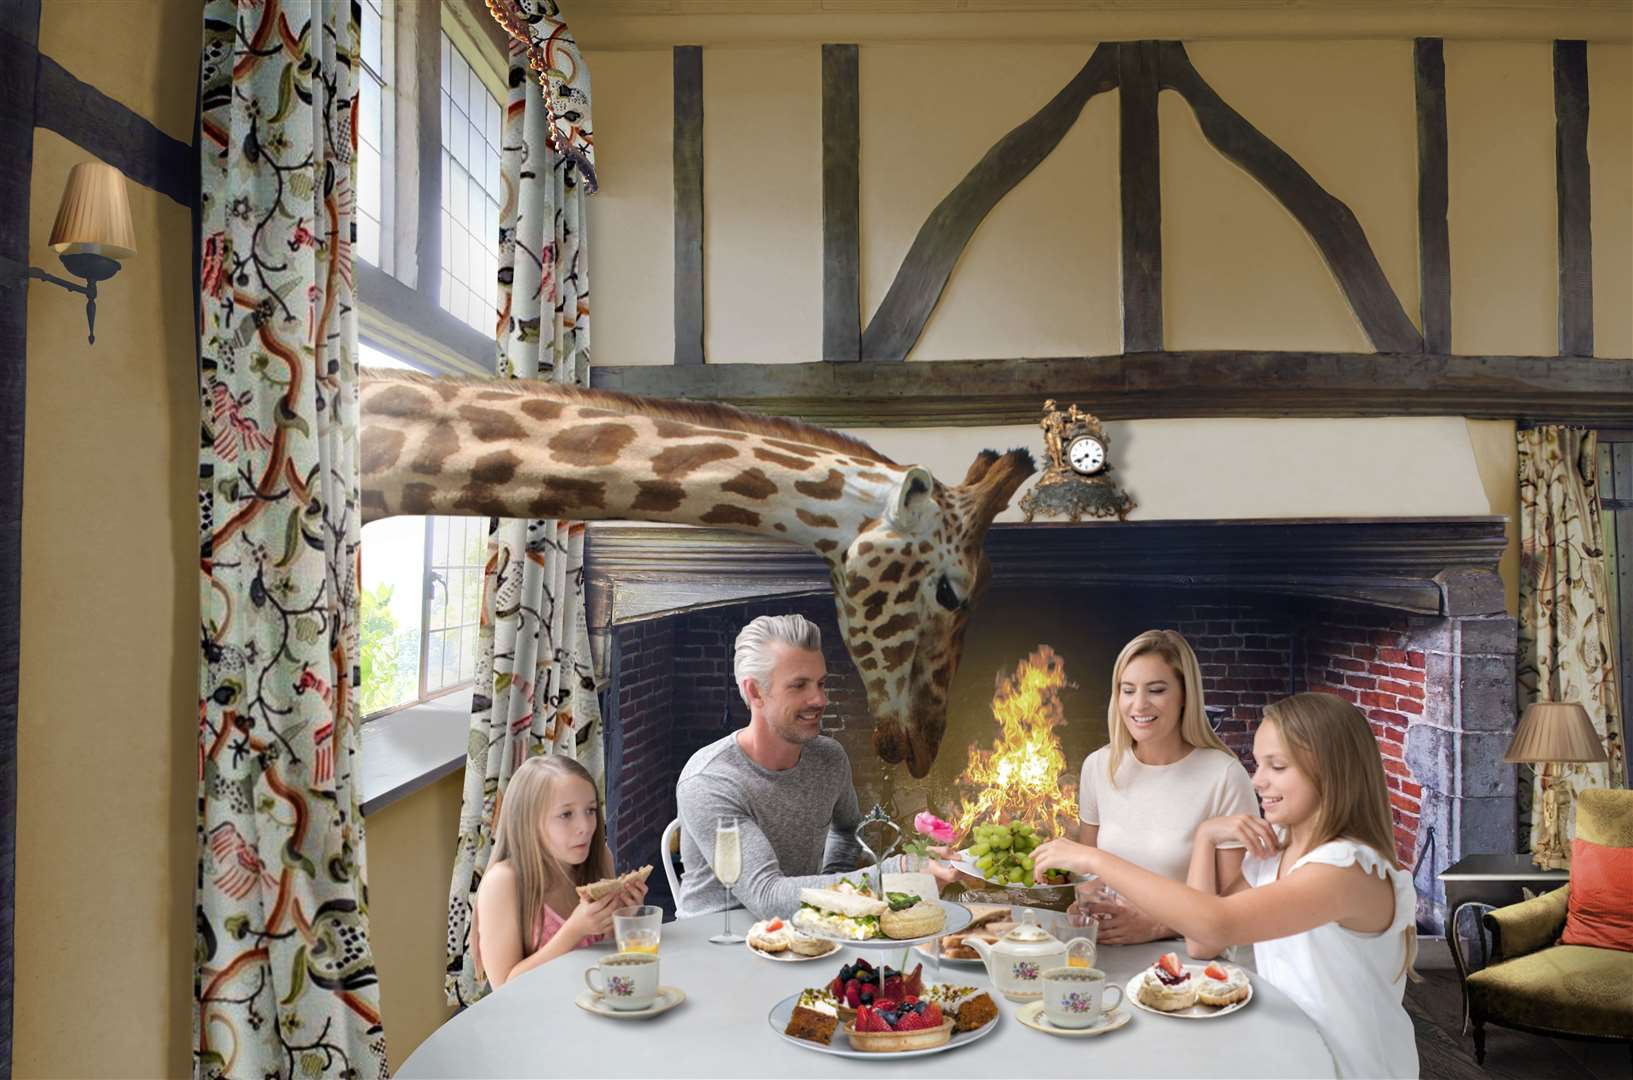 More than 9,000 people have applied for a stay at Giraffe Hall